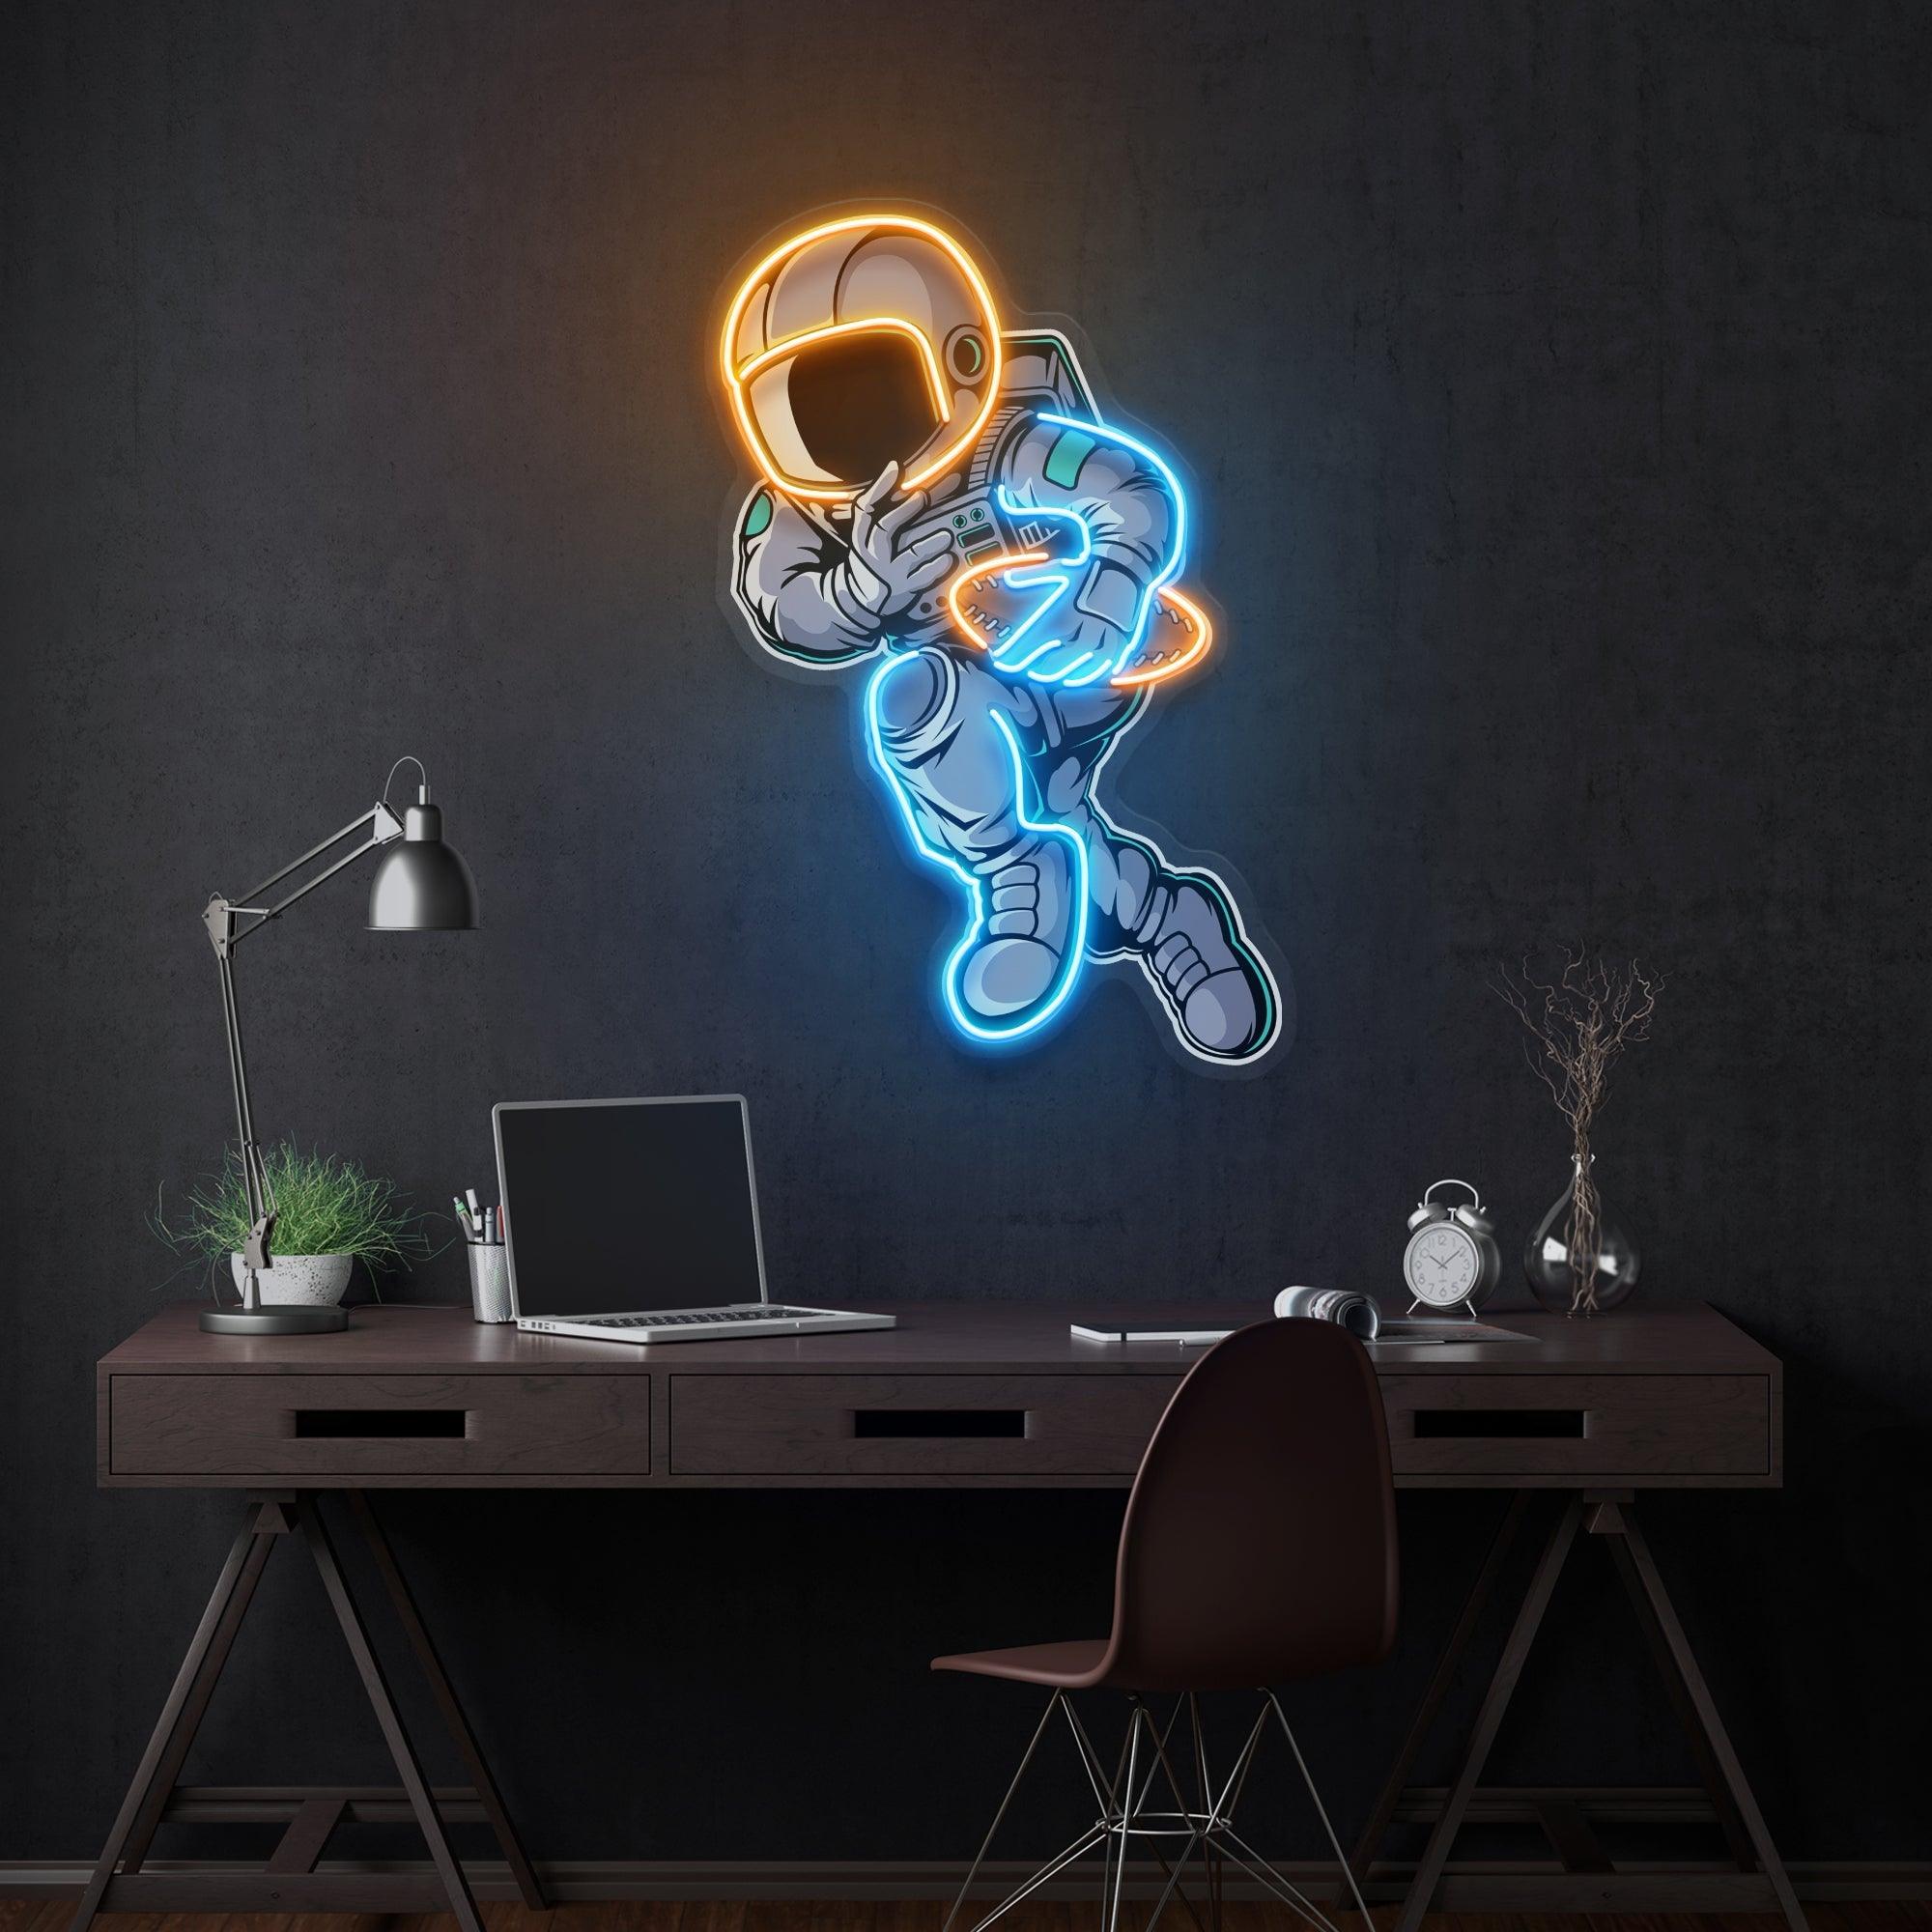 Astronaut Playing Rugby Artwork Led Neon Sign Light - Neonbir